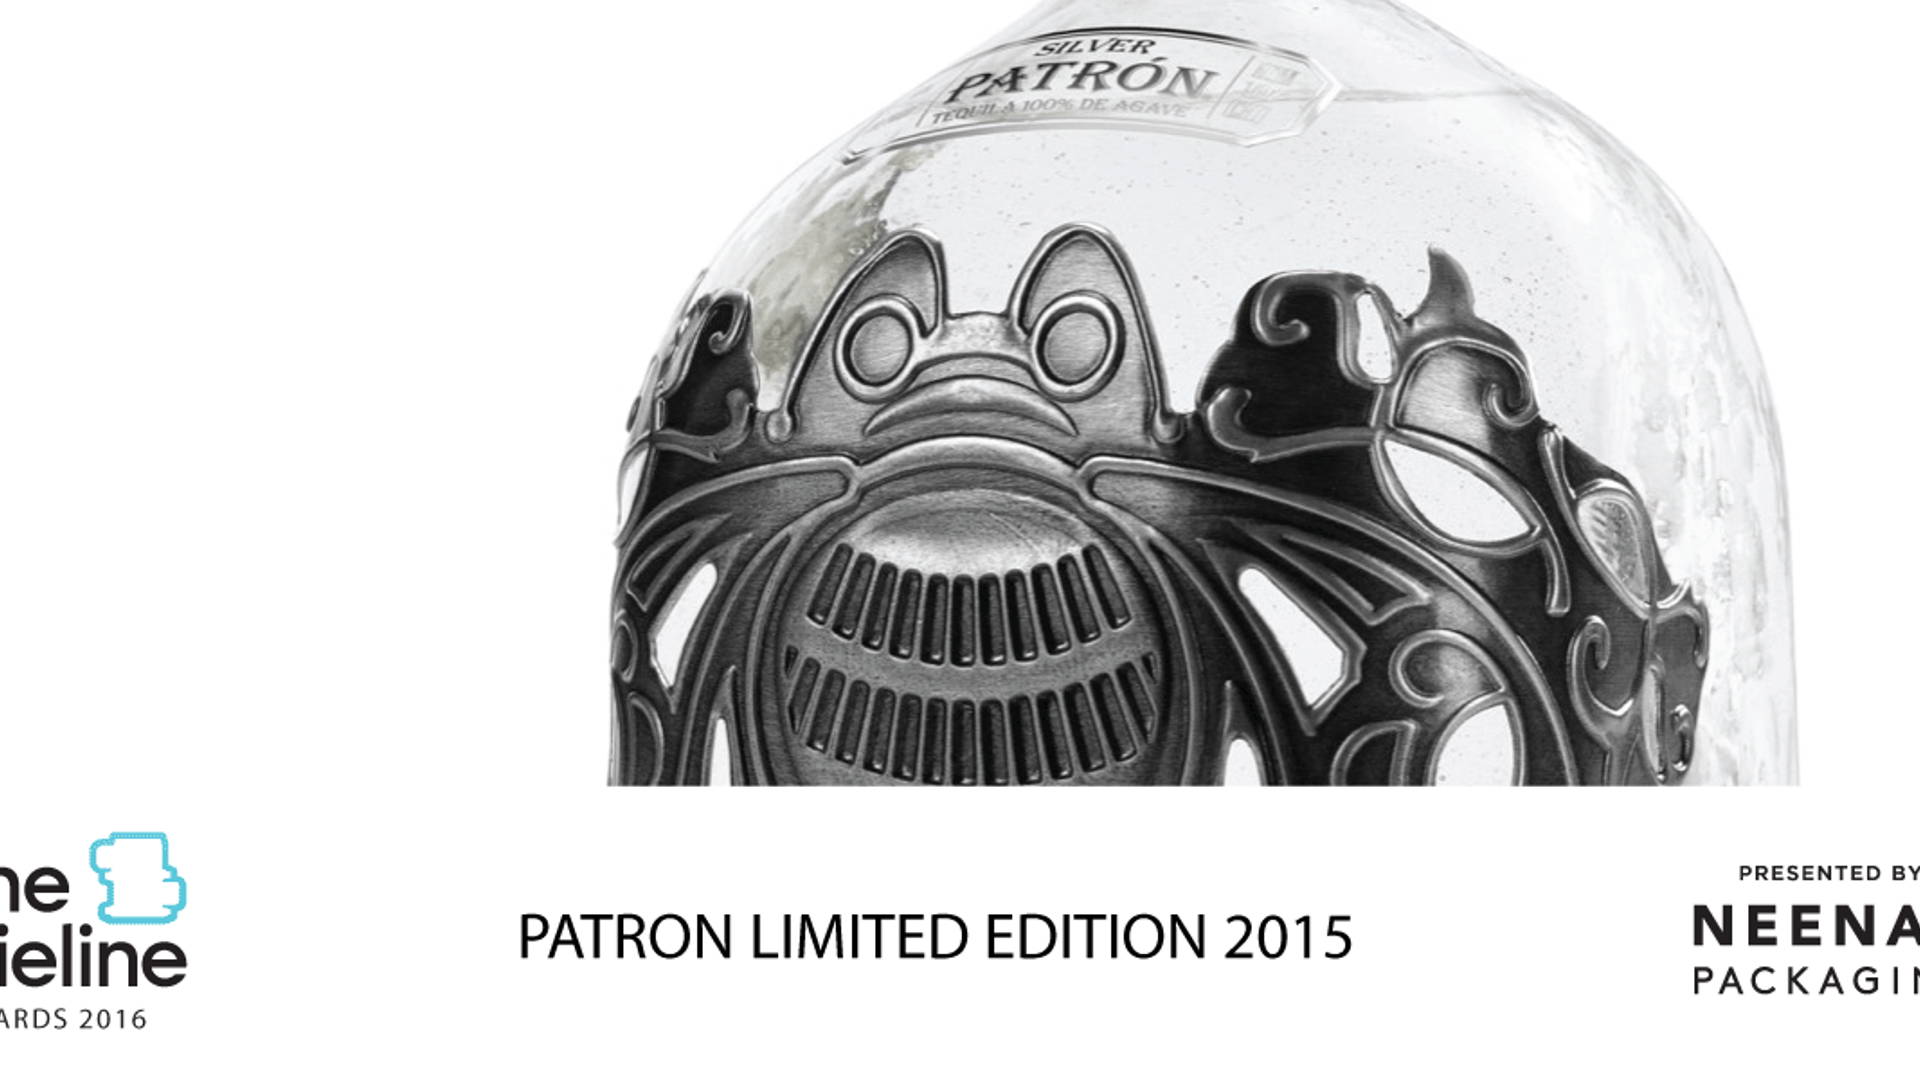 Featured image for The Dieline Awards 2016 Outstanding Achievements: Patron Limited Edition 2015 1ltr